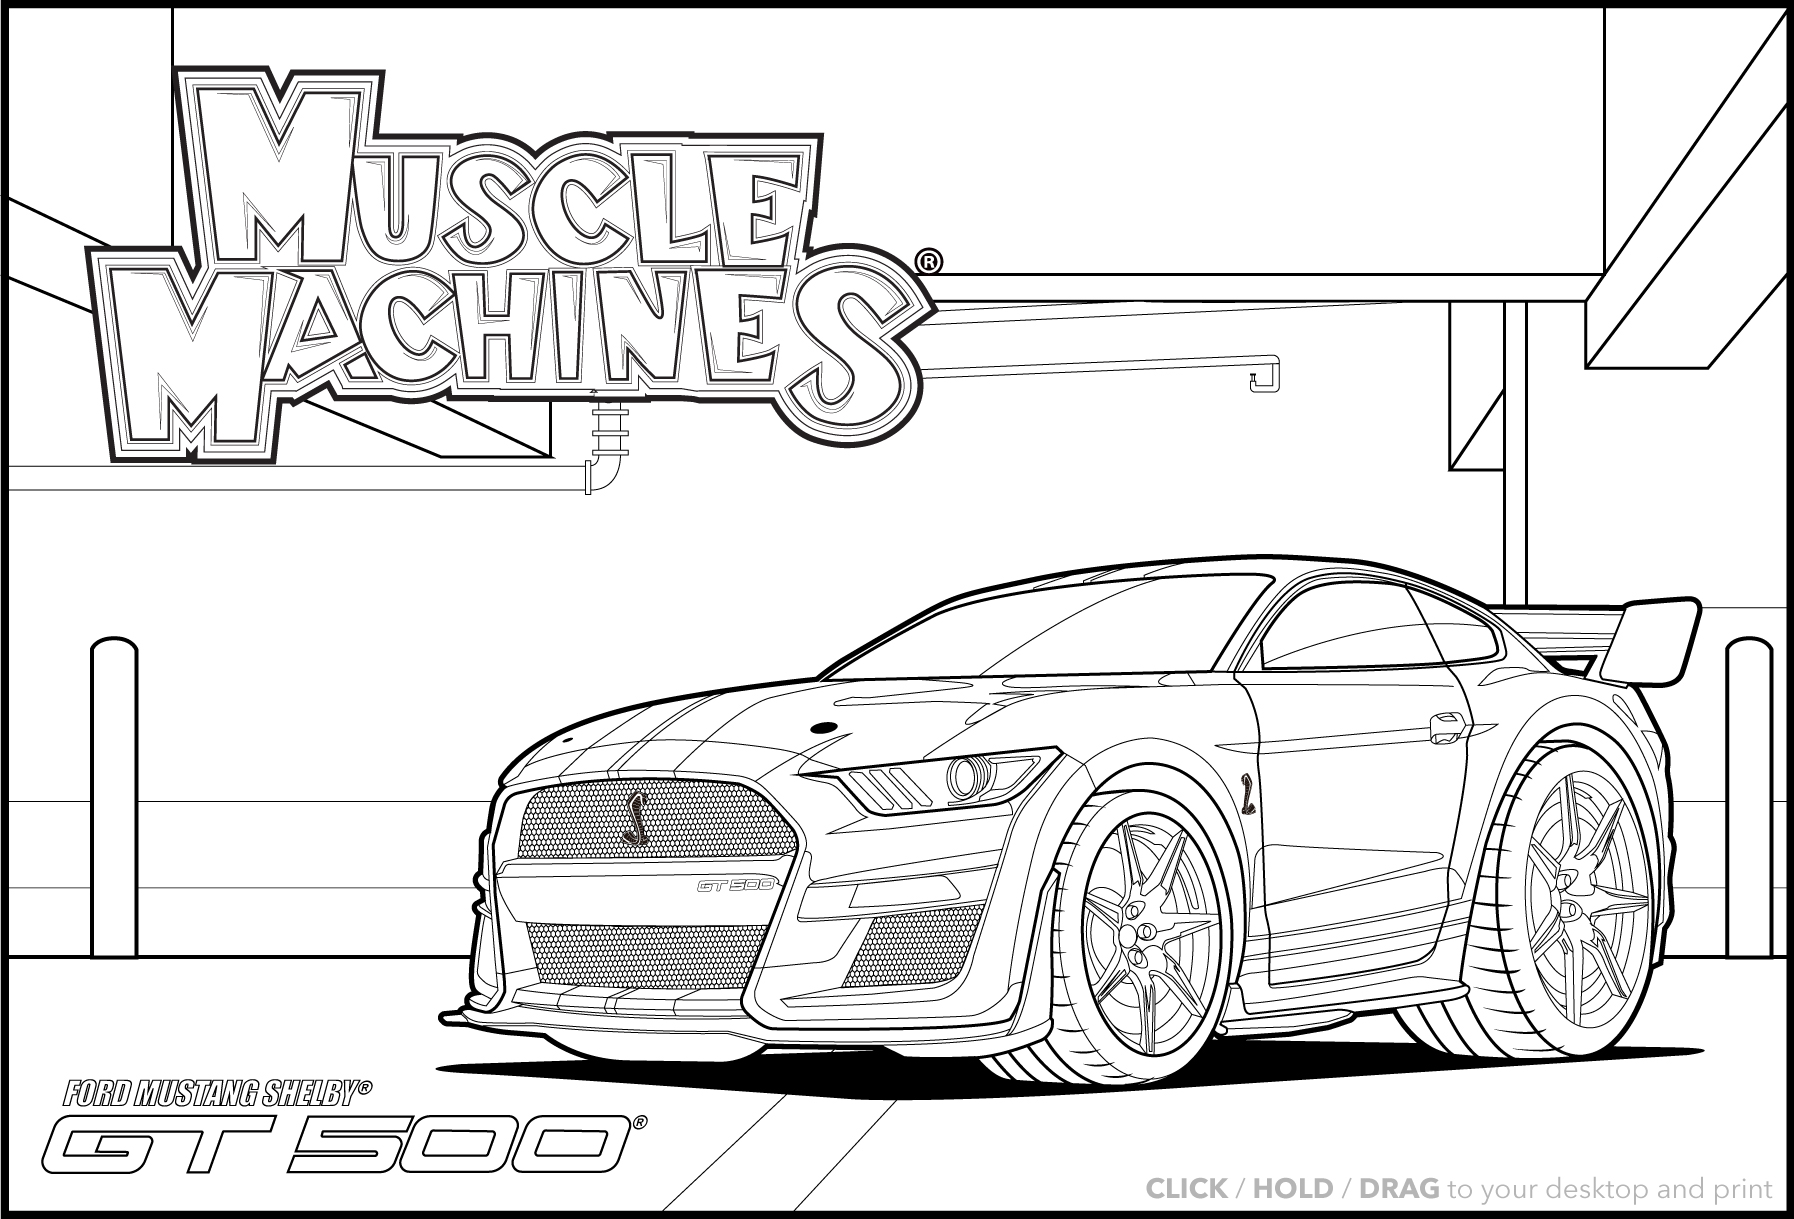 http://www.musclemachines.com/images/gt500.jpg